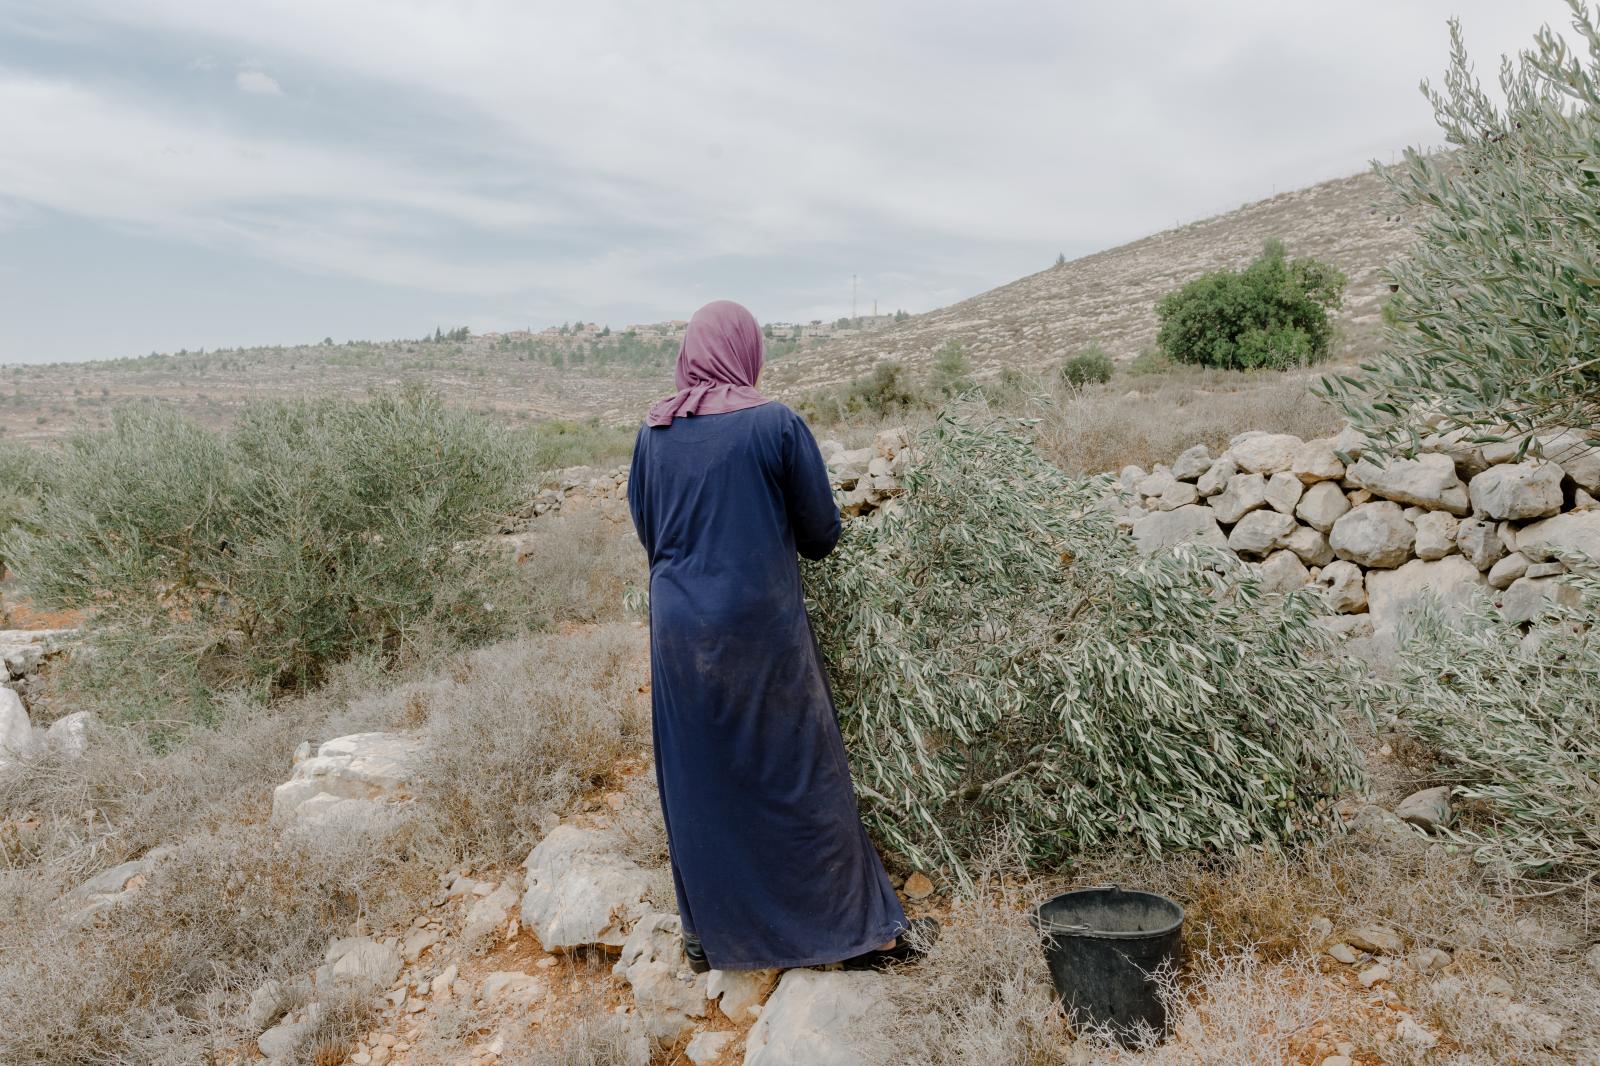 This Time of the Year: Olive Harvest in the Village of Awarta